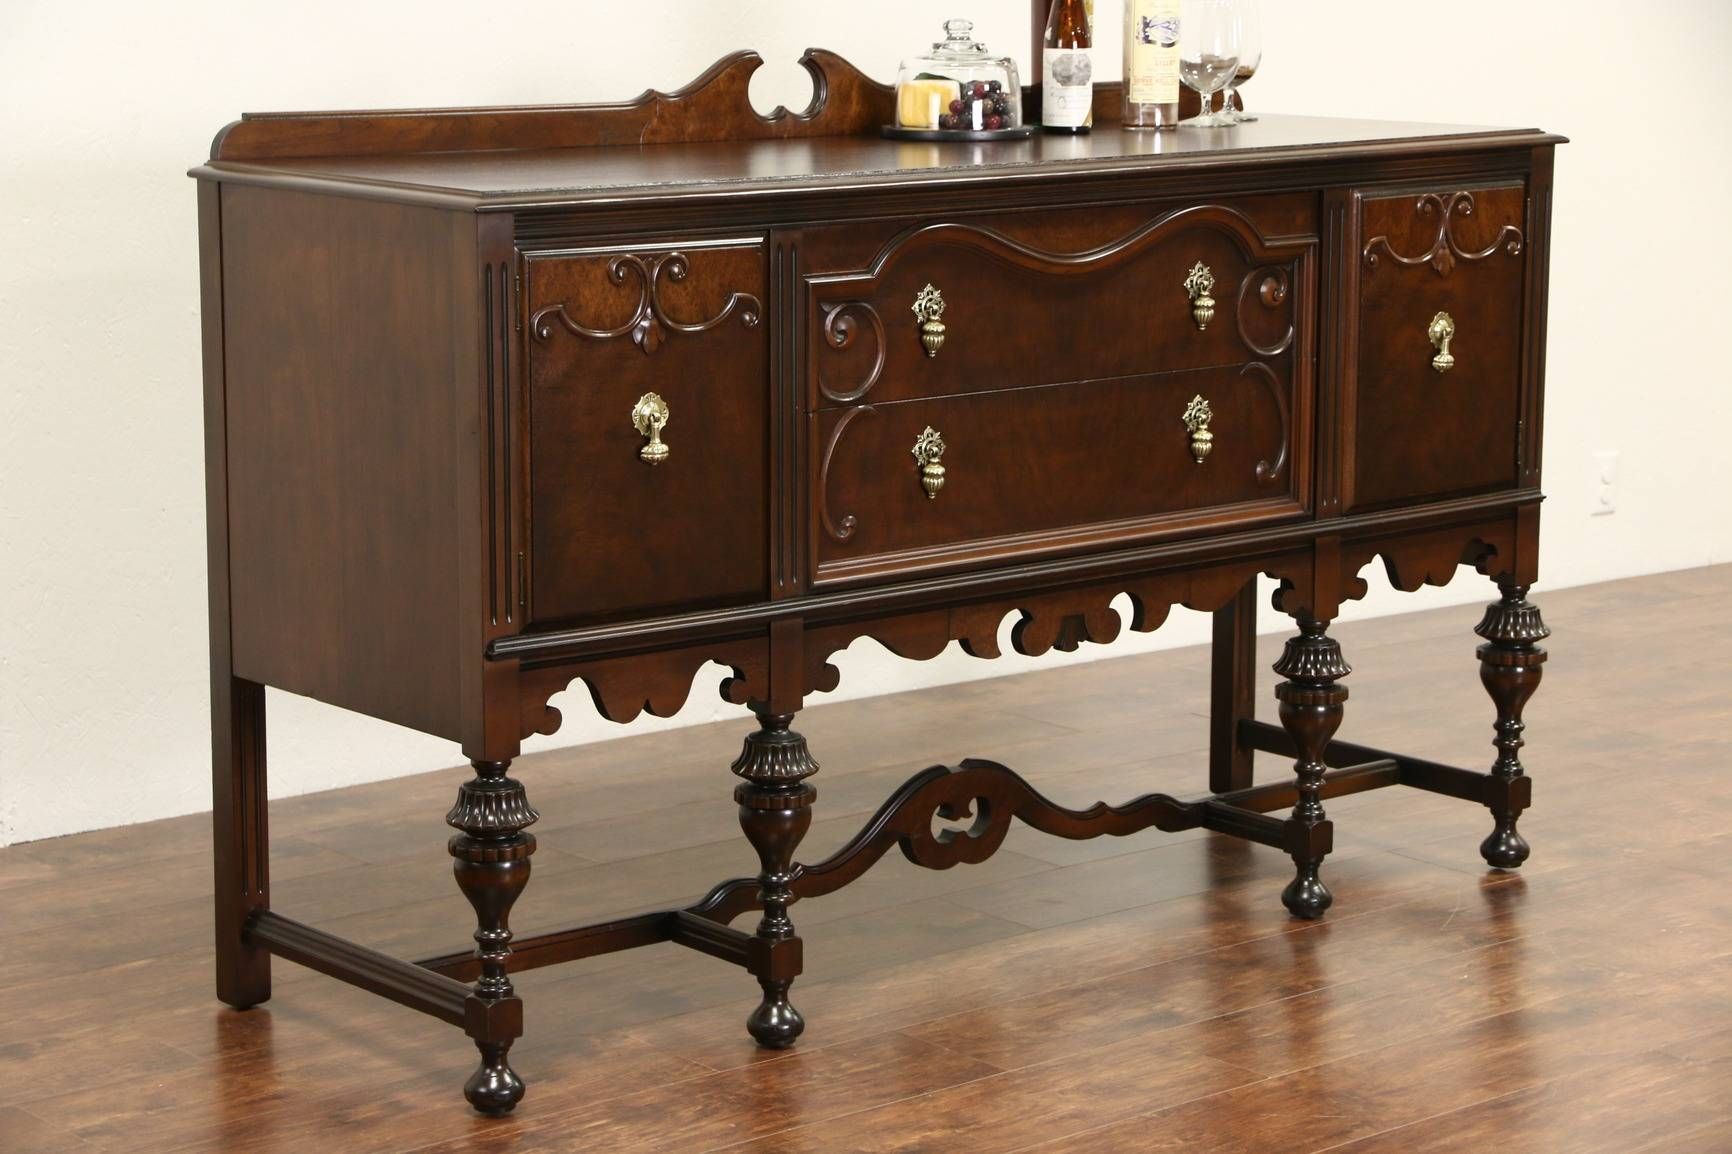 Sold – English Tudor 1920 Antique Walnut Sideboard Server Or Pertaining To 2017 Buffet Sideboard Servers (View 13 of 15)